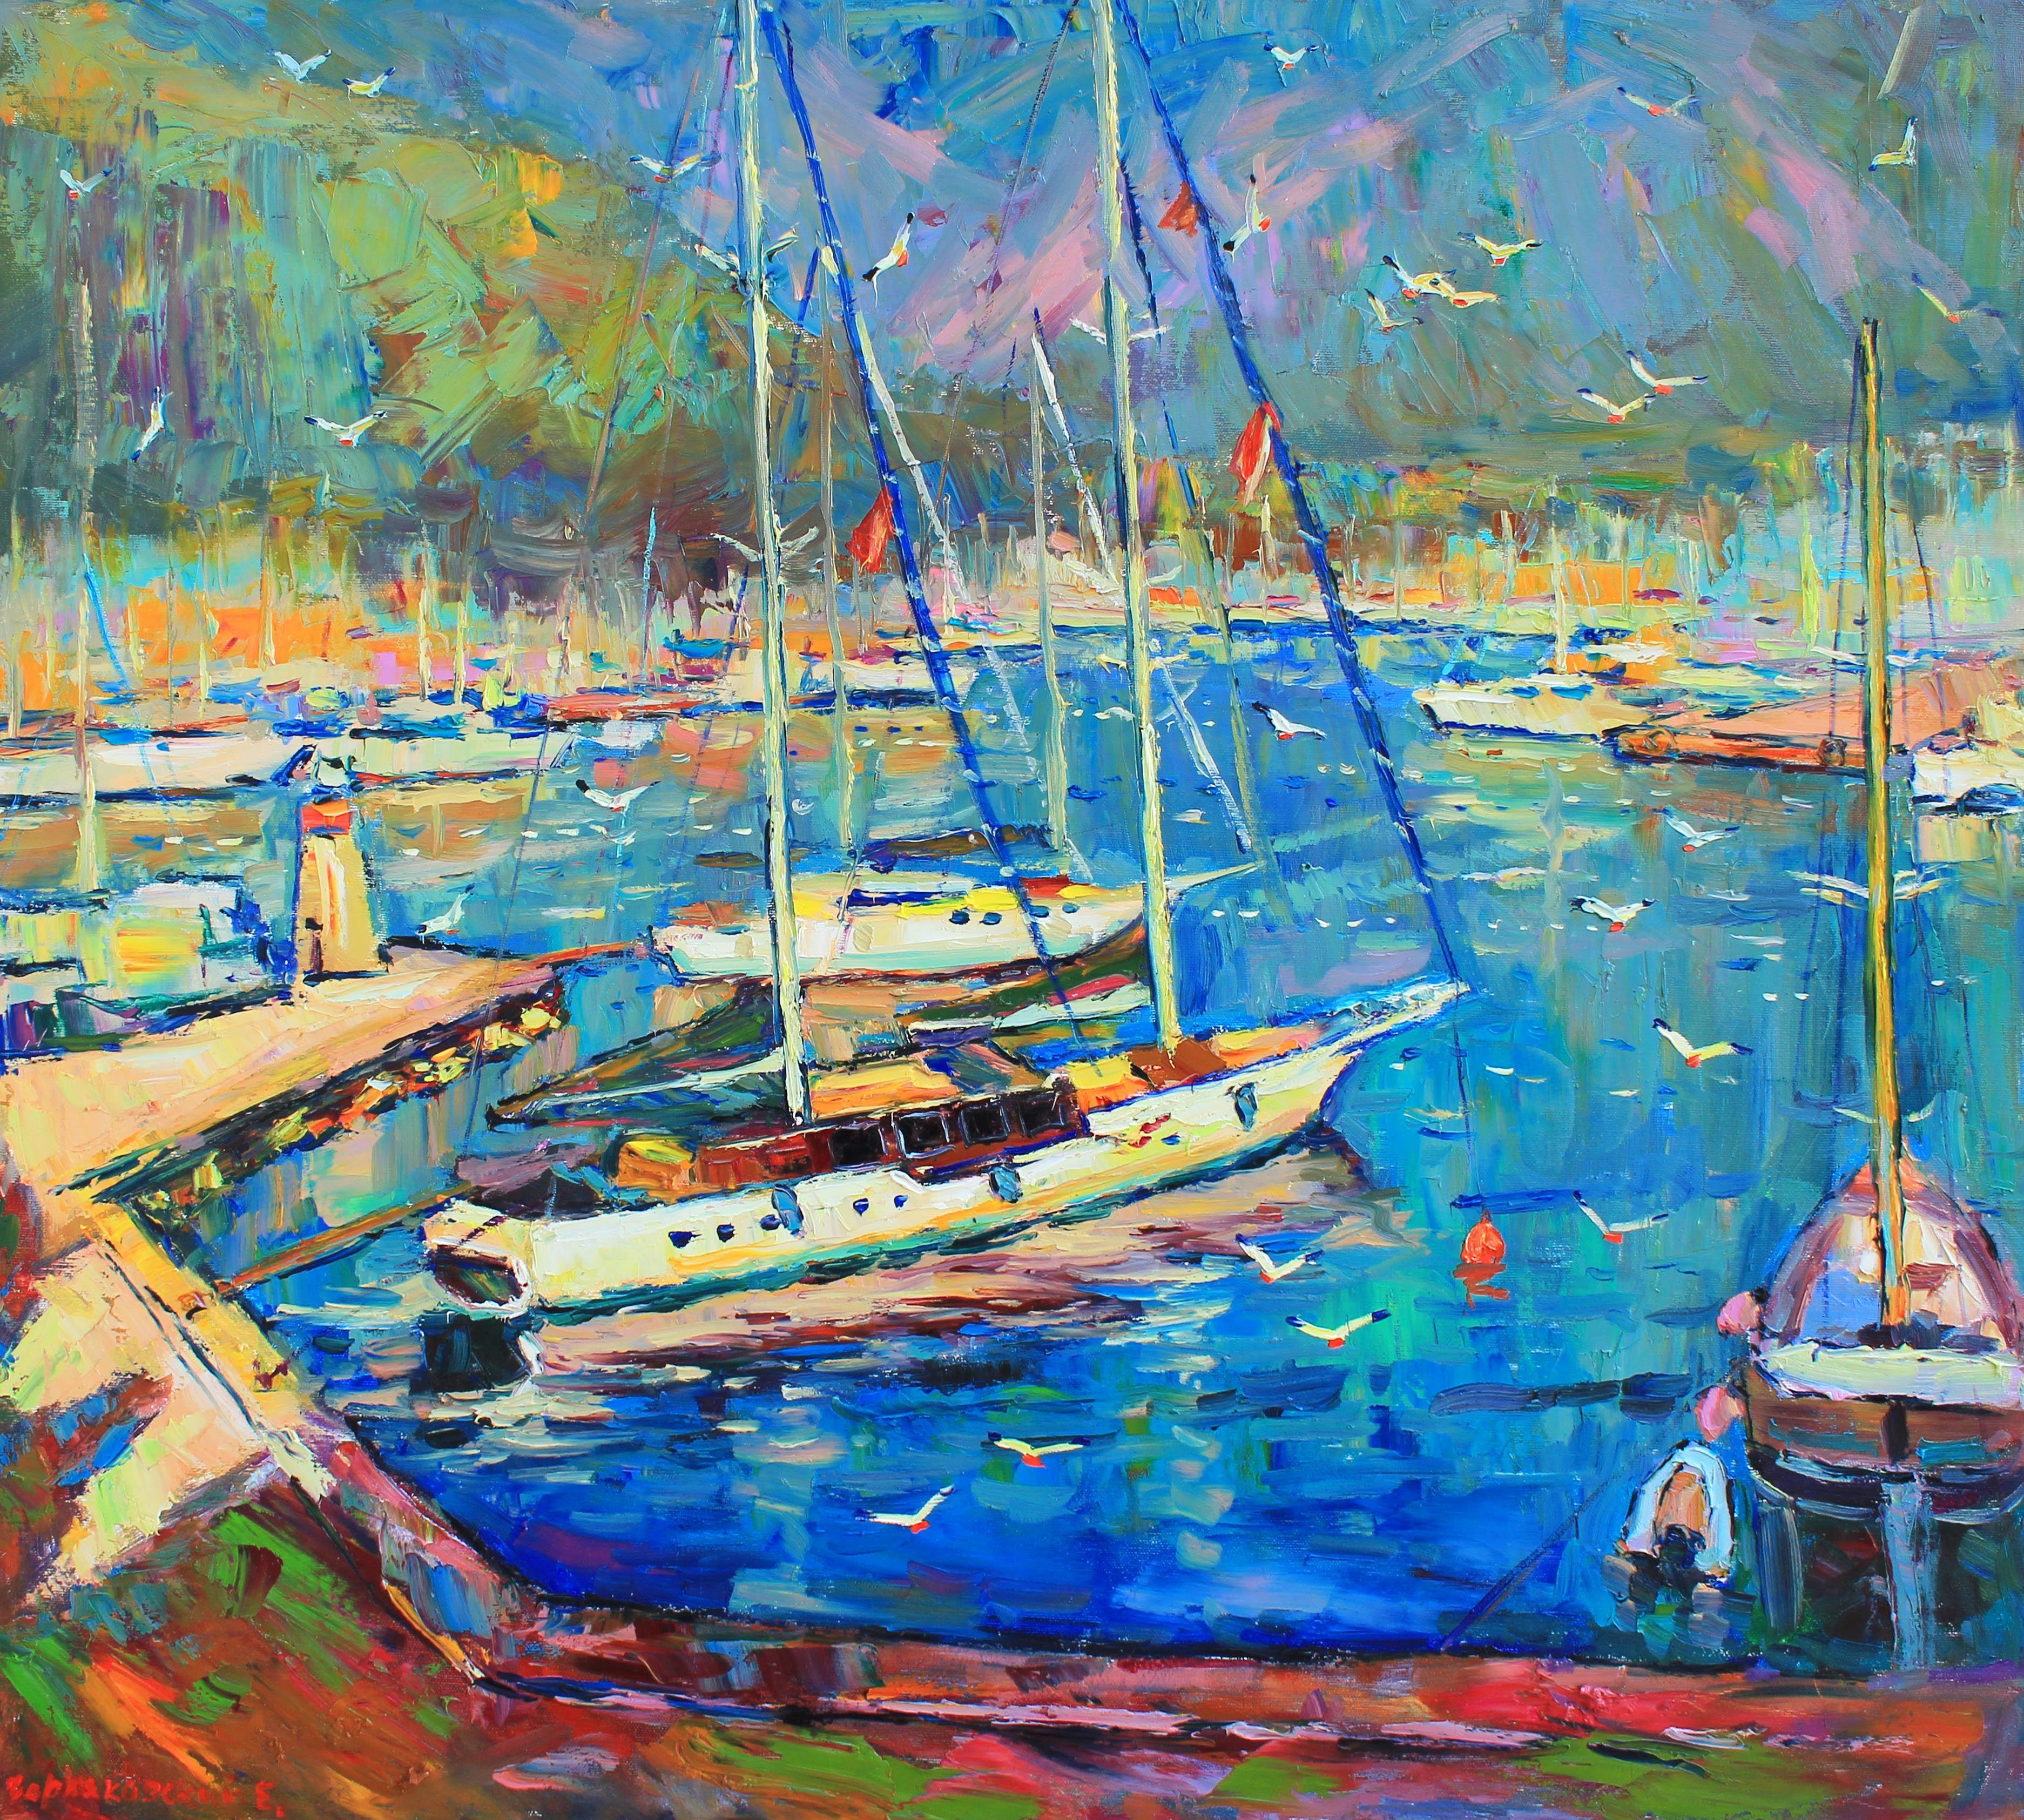 Original Oil painting by Ukrainian artist Evgeny Chernyakovsky    "Yachts  "  80.0 X 90.0 CM / 31.4 X 35.4 IN  HIGH QUALITY oil on canvas  Signed on the front and back  Dated 2022  Good condition  GUARANTEE OF AUTHENTICITY   :: Painting ::